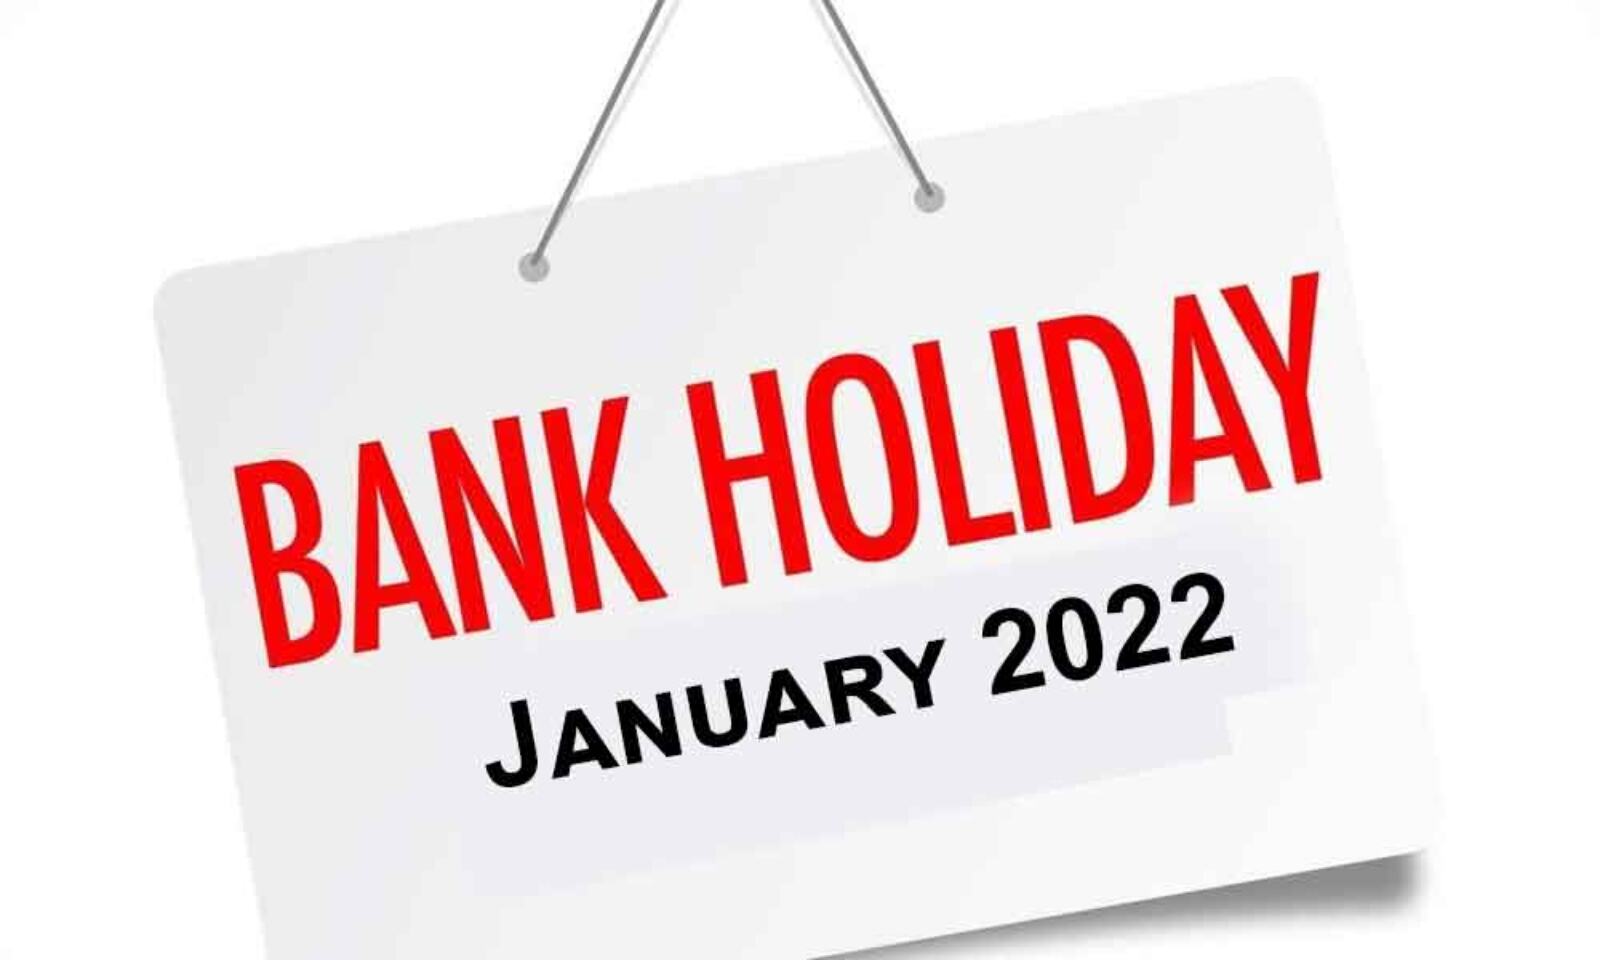 Are Banks Open Today Complete List Of Bank Holidays In 2022 www.vrogue.co